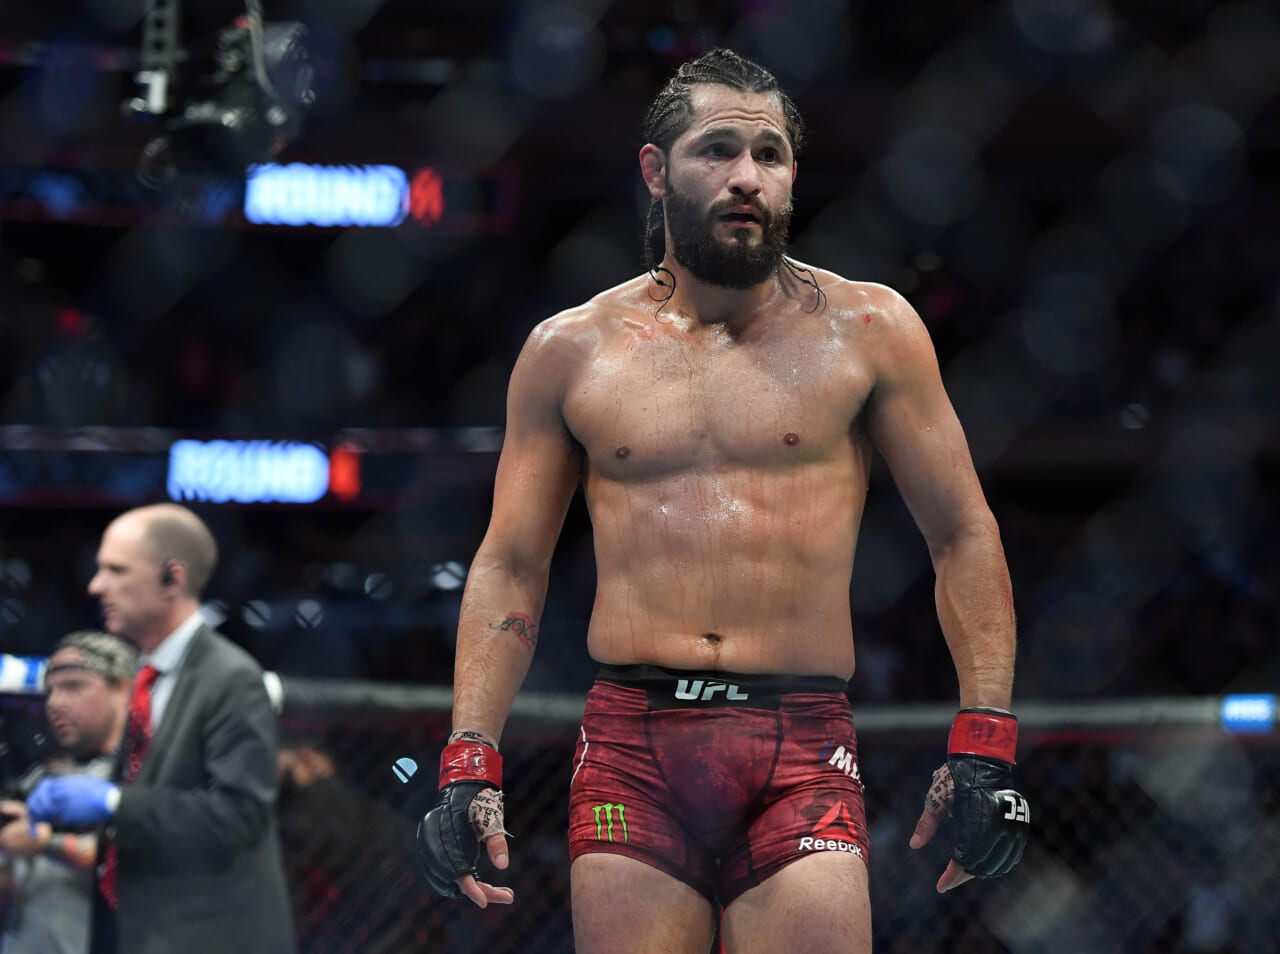 After getting knocked out at UFC 261, what’s next for Jorge Masvidal?